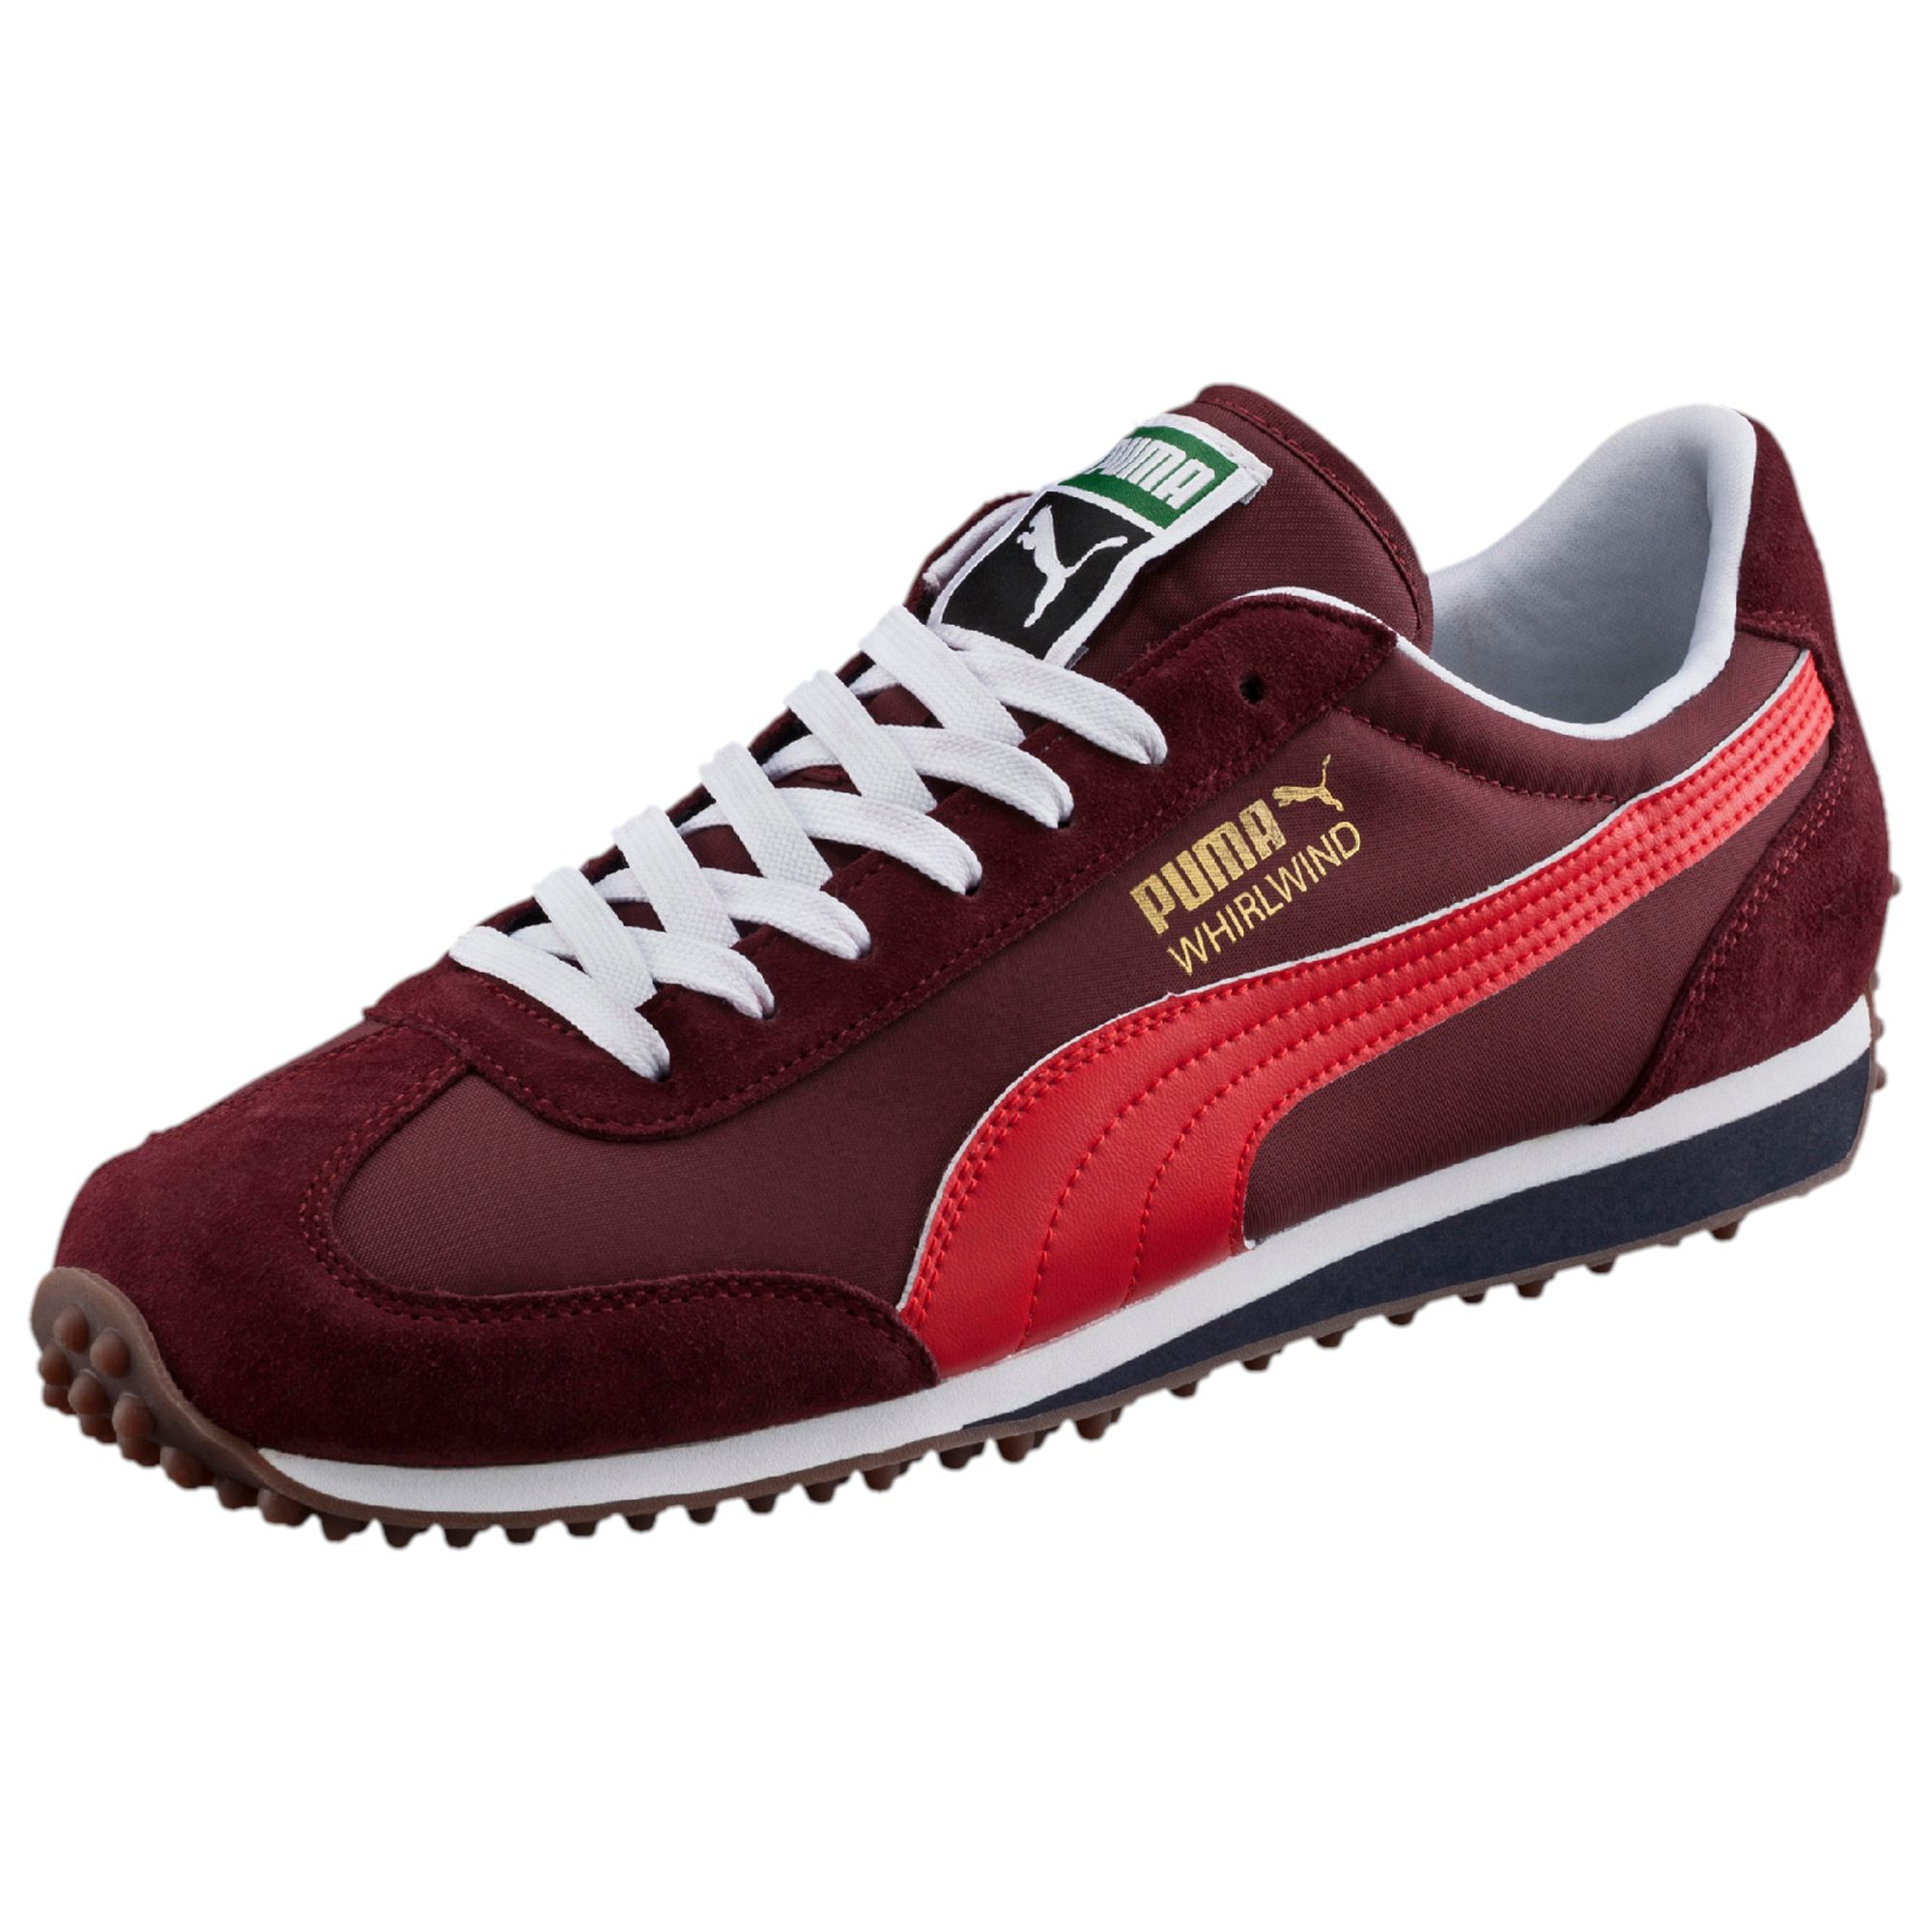 Lyst - PUMA Whirlwind Classic Men's Sneakers in Red for Men